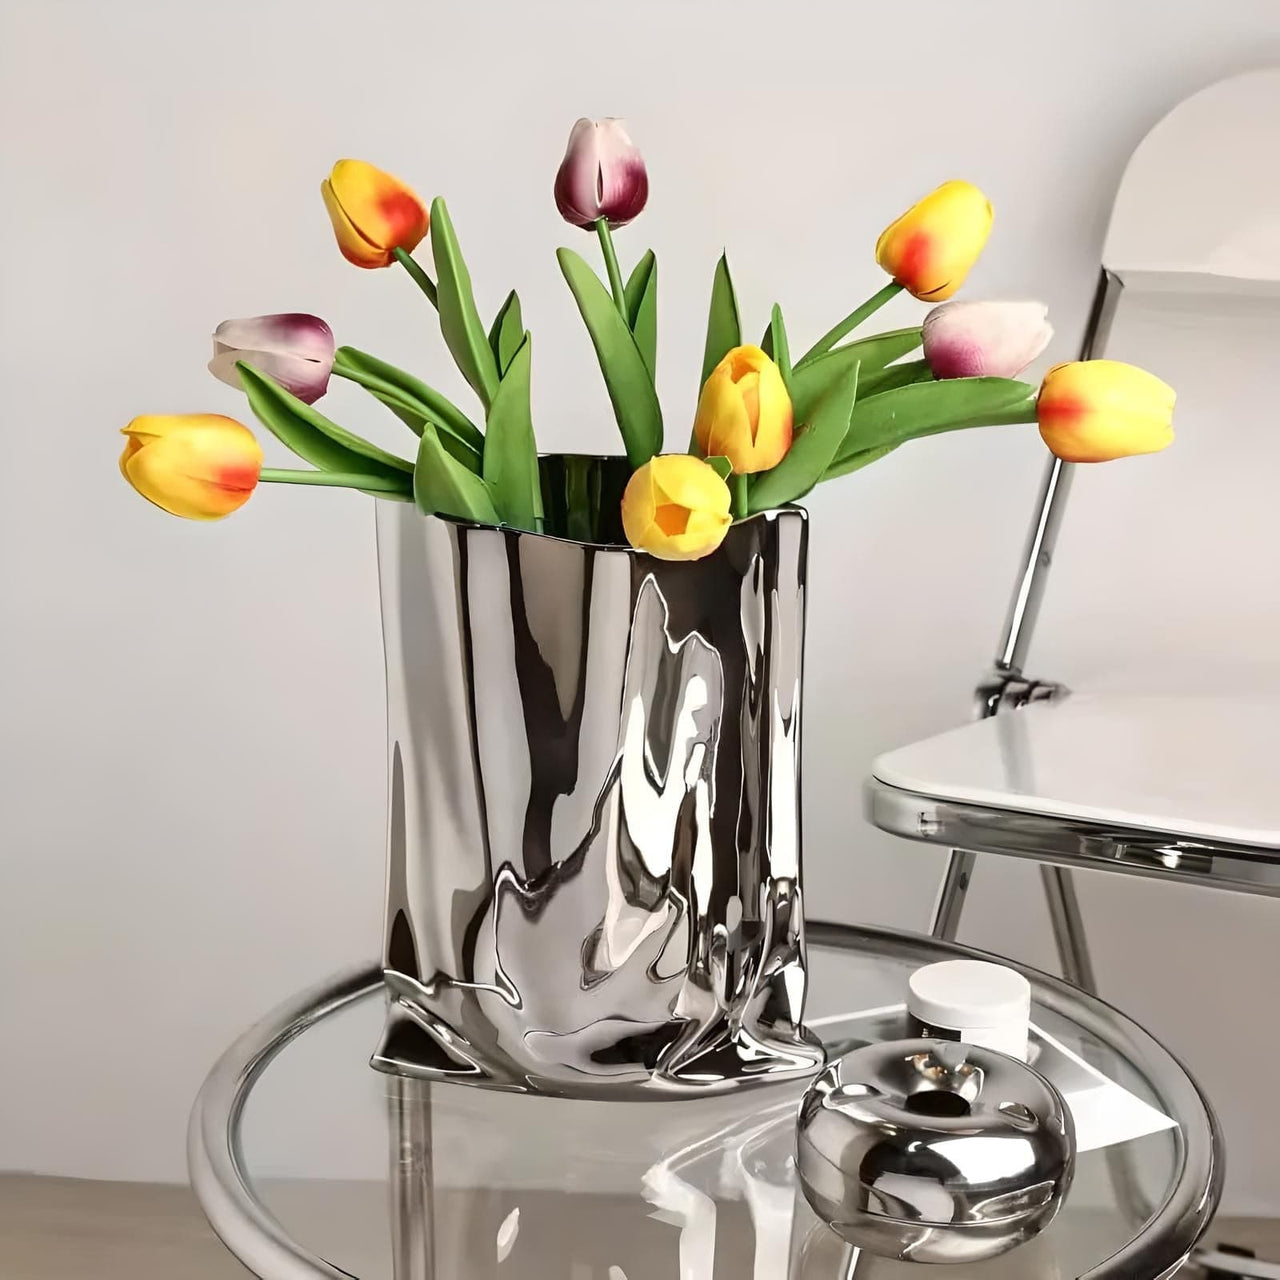 The Abstract Chrome Vase